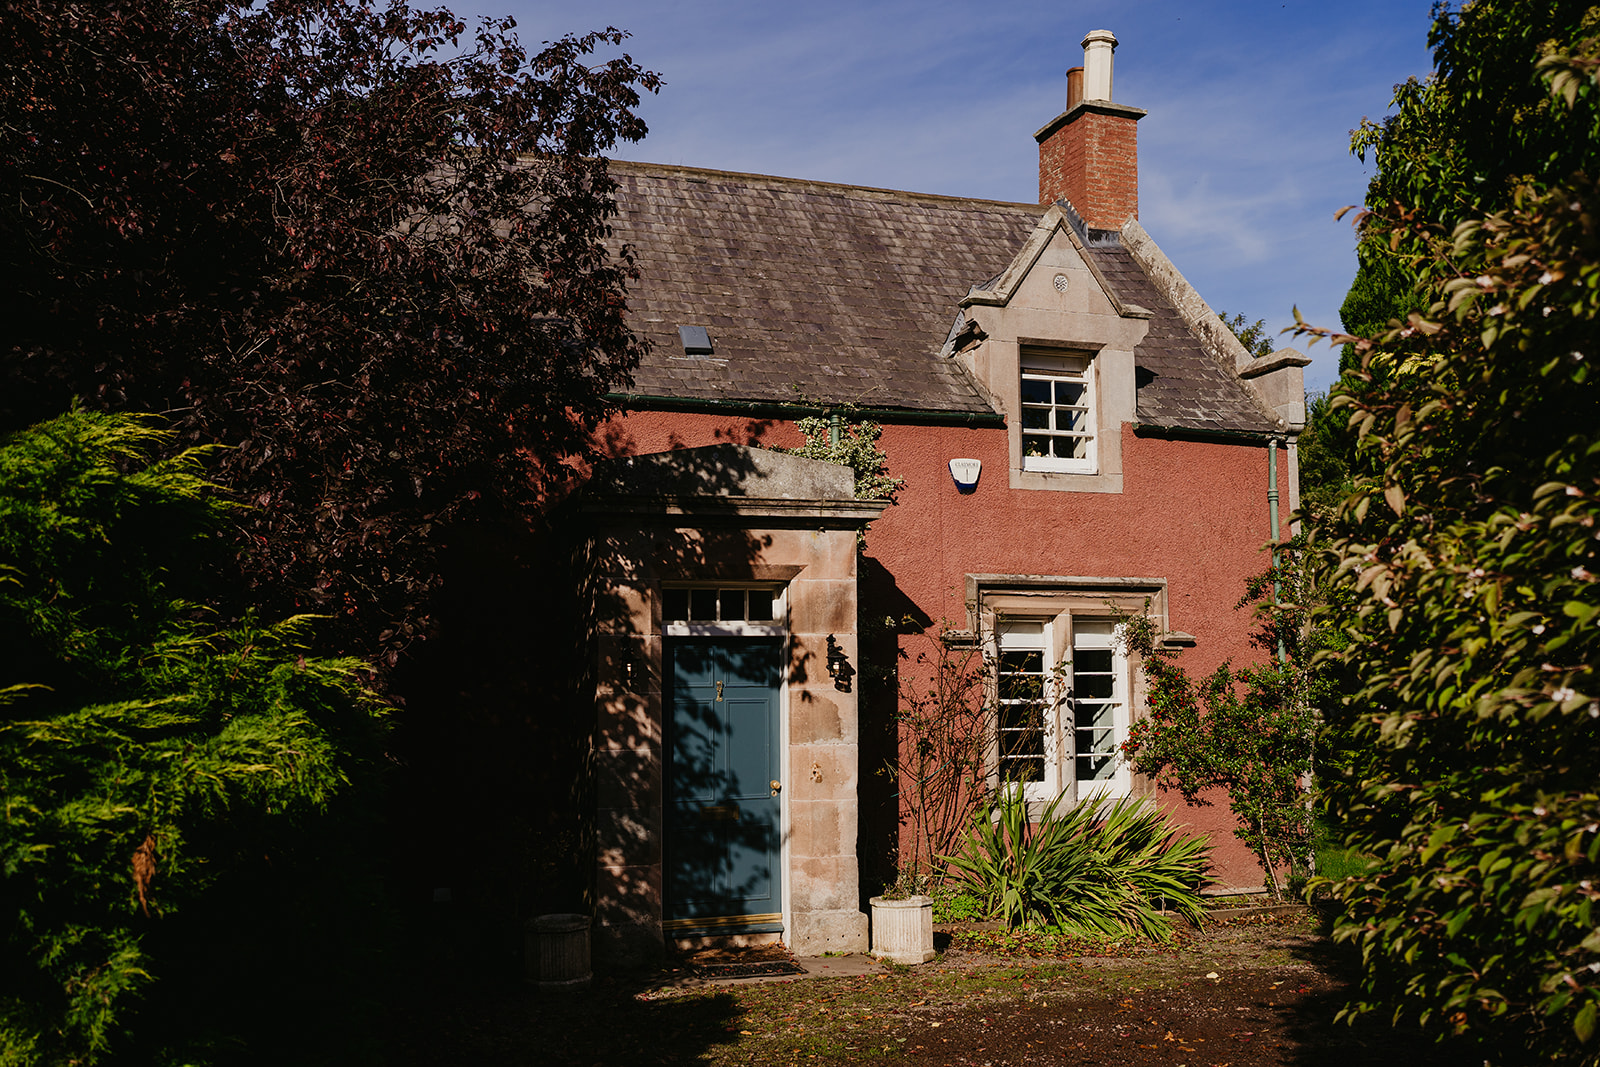 The bridal prep cottage at Broxmouth Courtyard